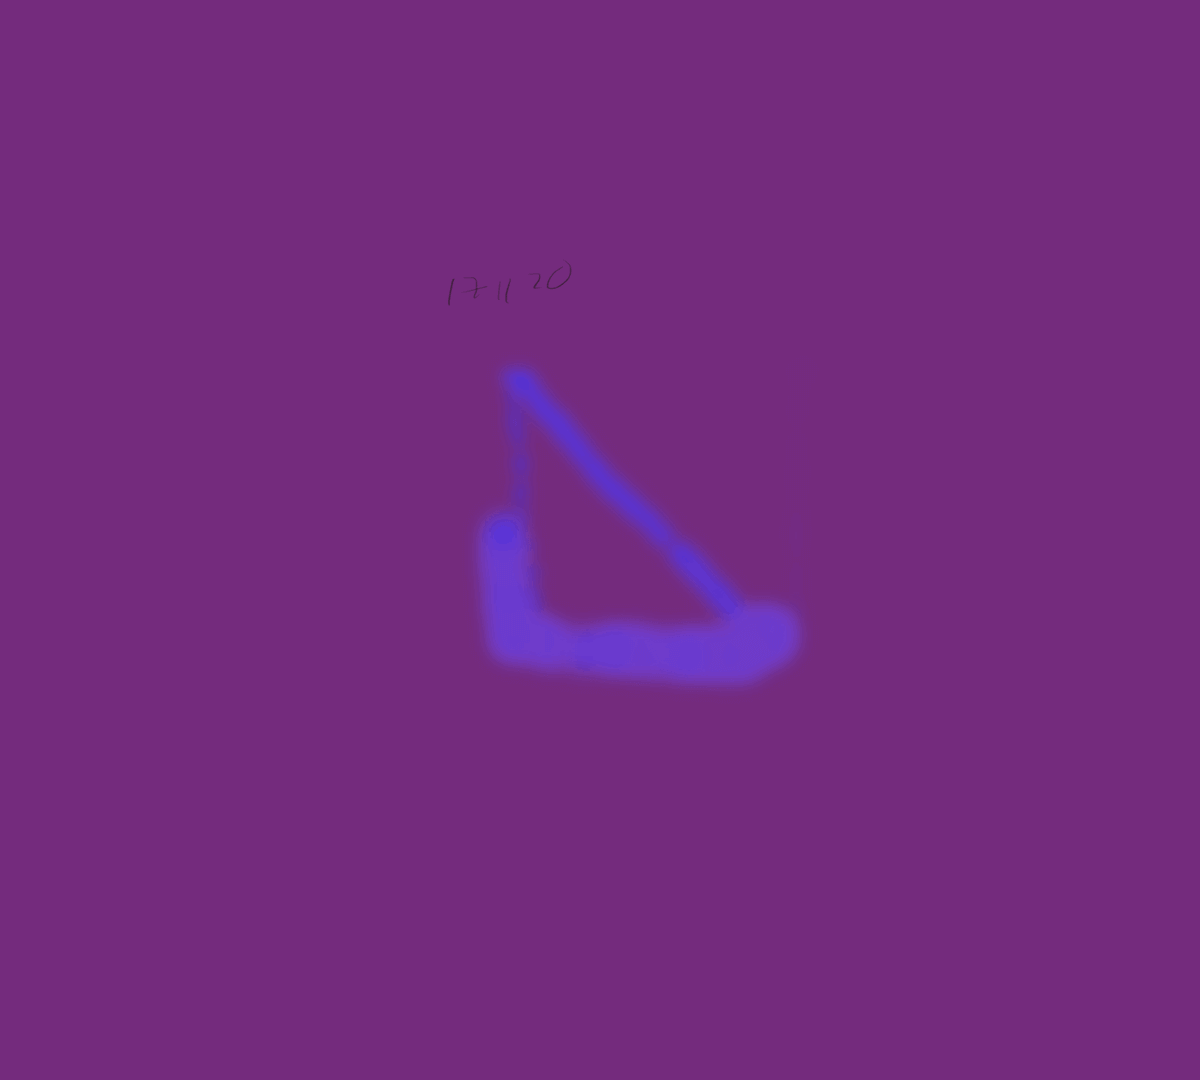 Thumb browser painting that looks like phone screen grease in violet on a warm purple background.